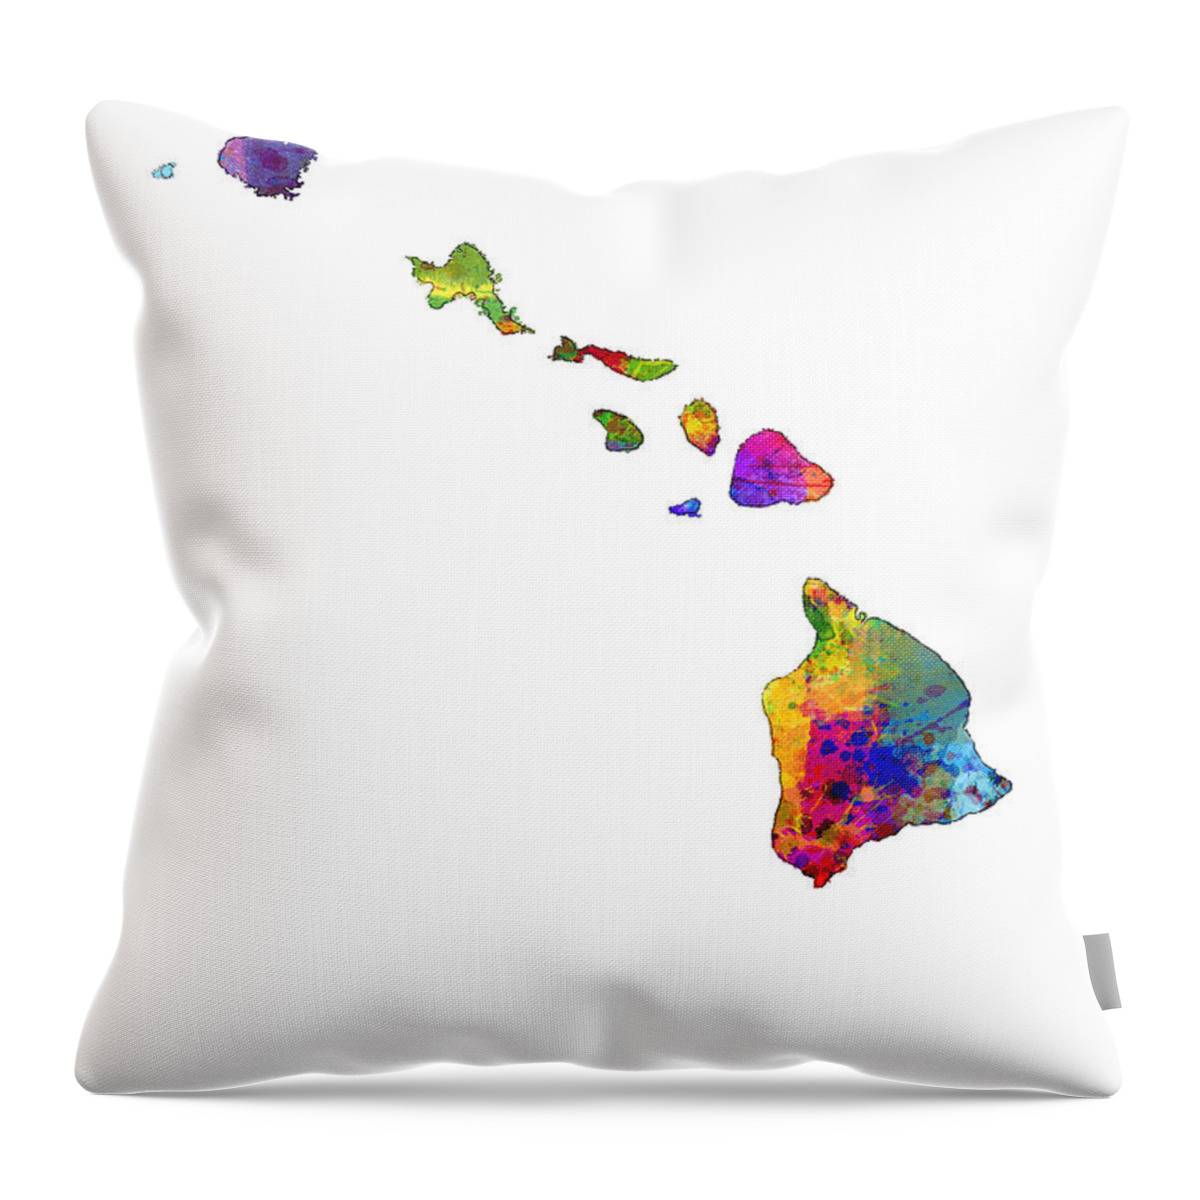 United States Map Throw Pillow featuring the digital art Hawaii Map by Michael Tompsett